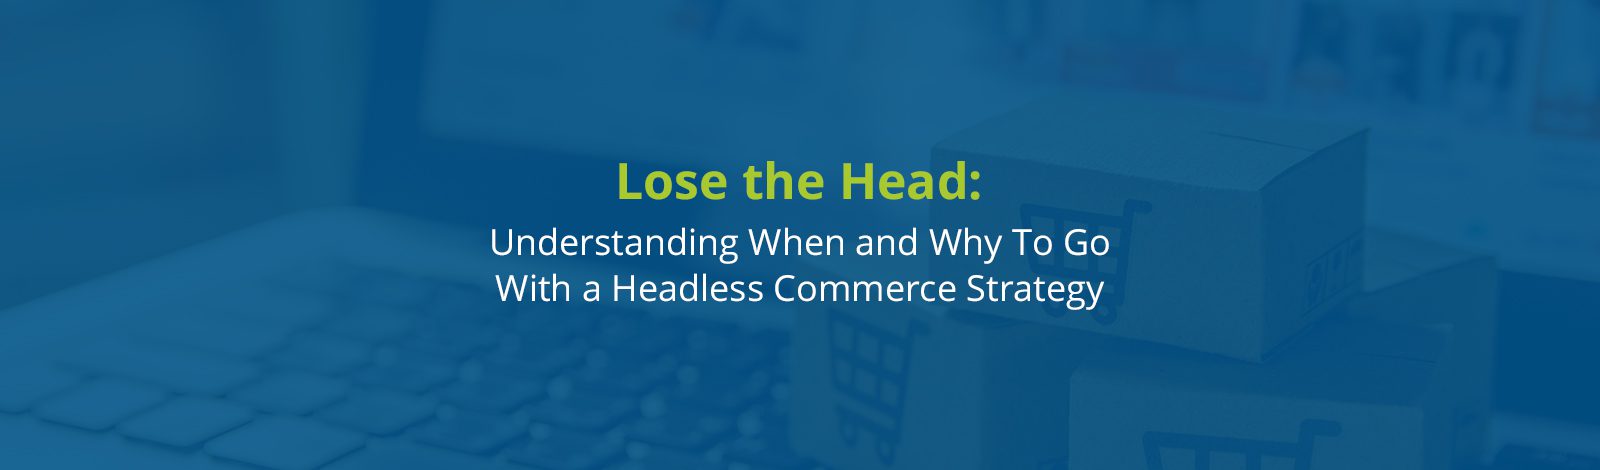 when-why-go-with-headless-ecommerce-strategy